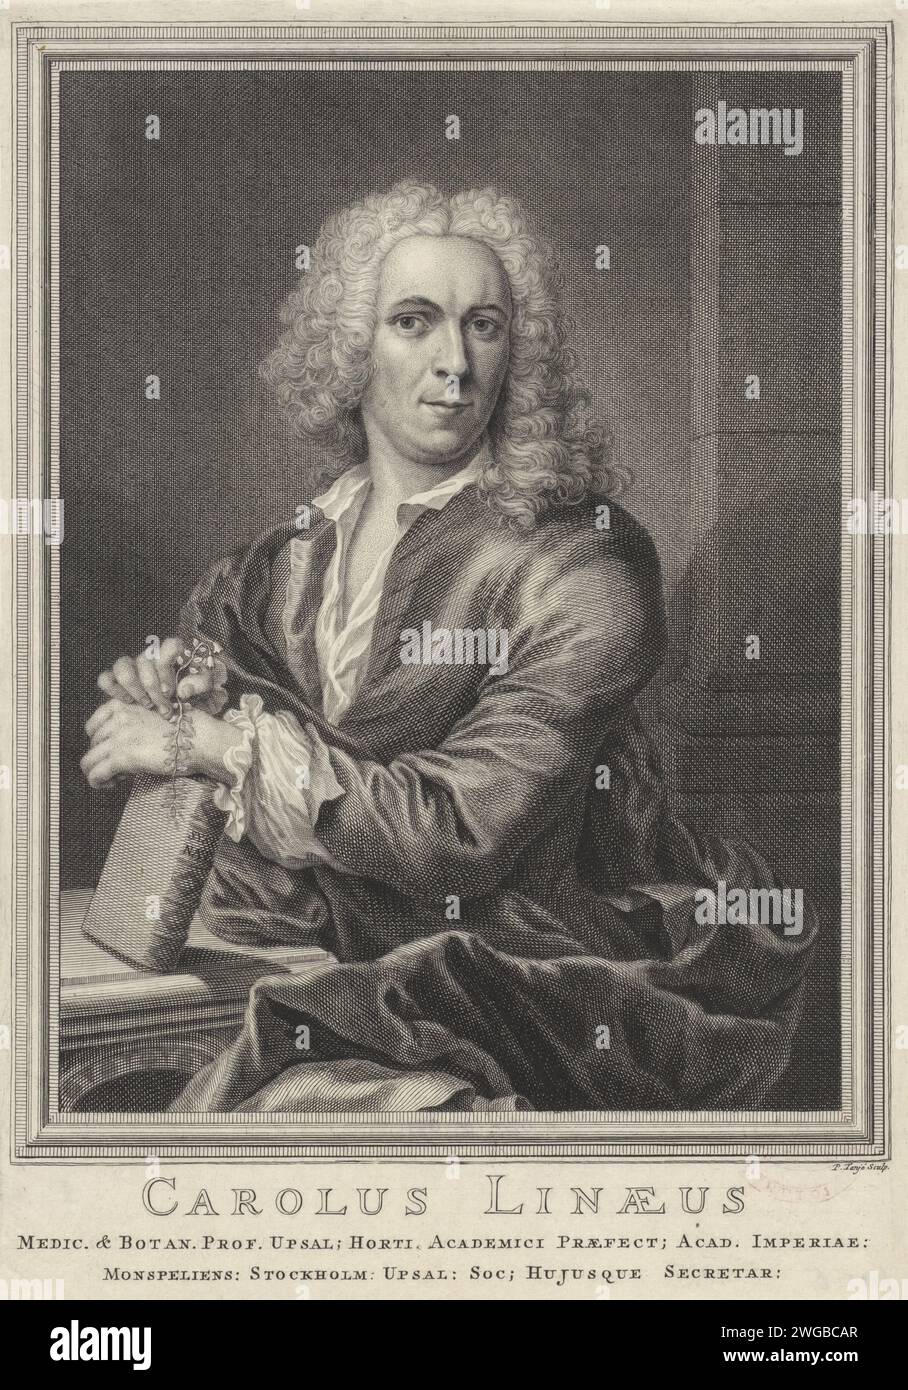 Portrait of Carolus Linaeus, Pieter Tanjé, 1716 - 1761 print Portrait of botanist Carolus Linaeus, resting his hands on his book Systema Naturae. Amsterdam paper engraving / etching flowers Stock Photo